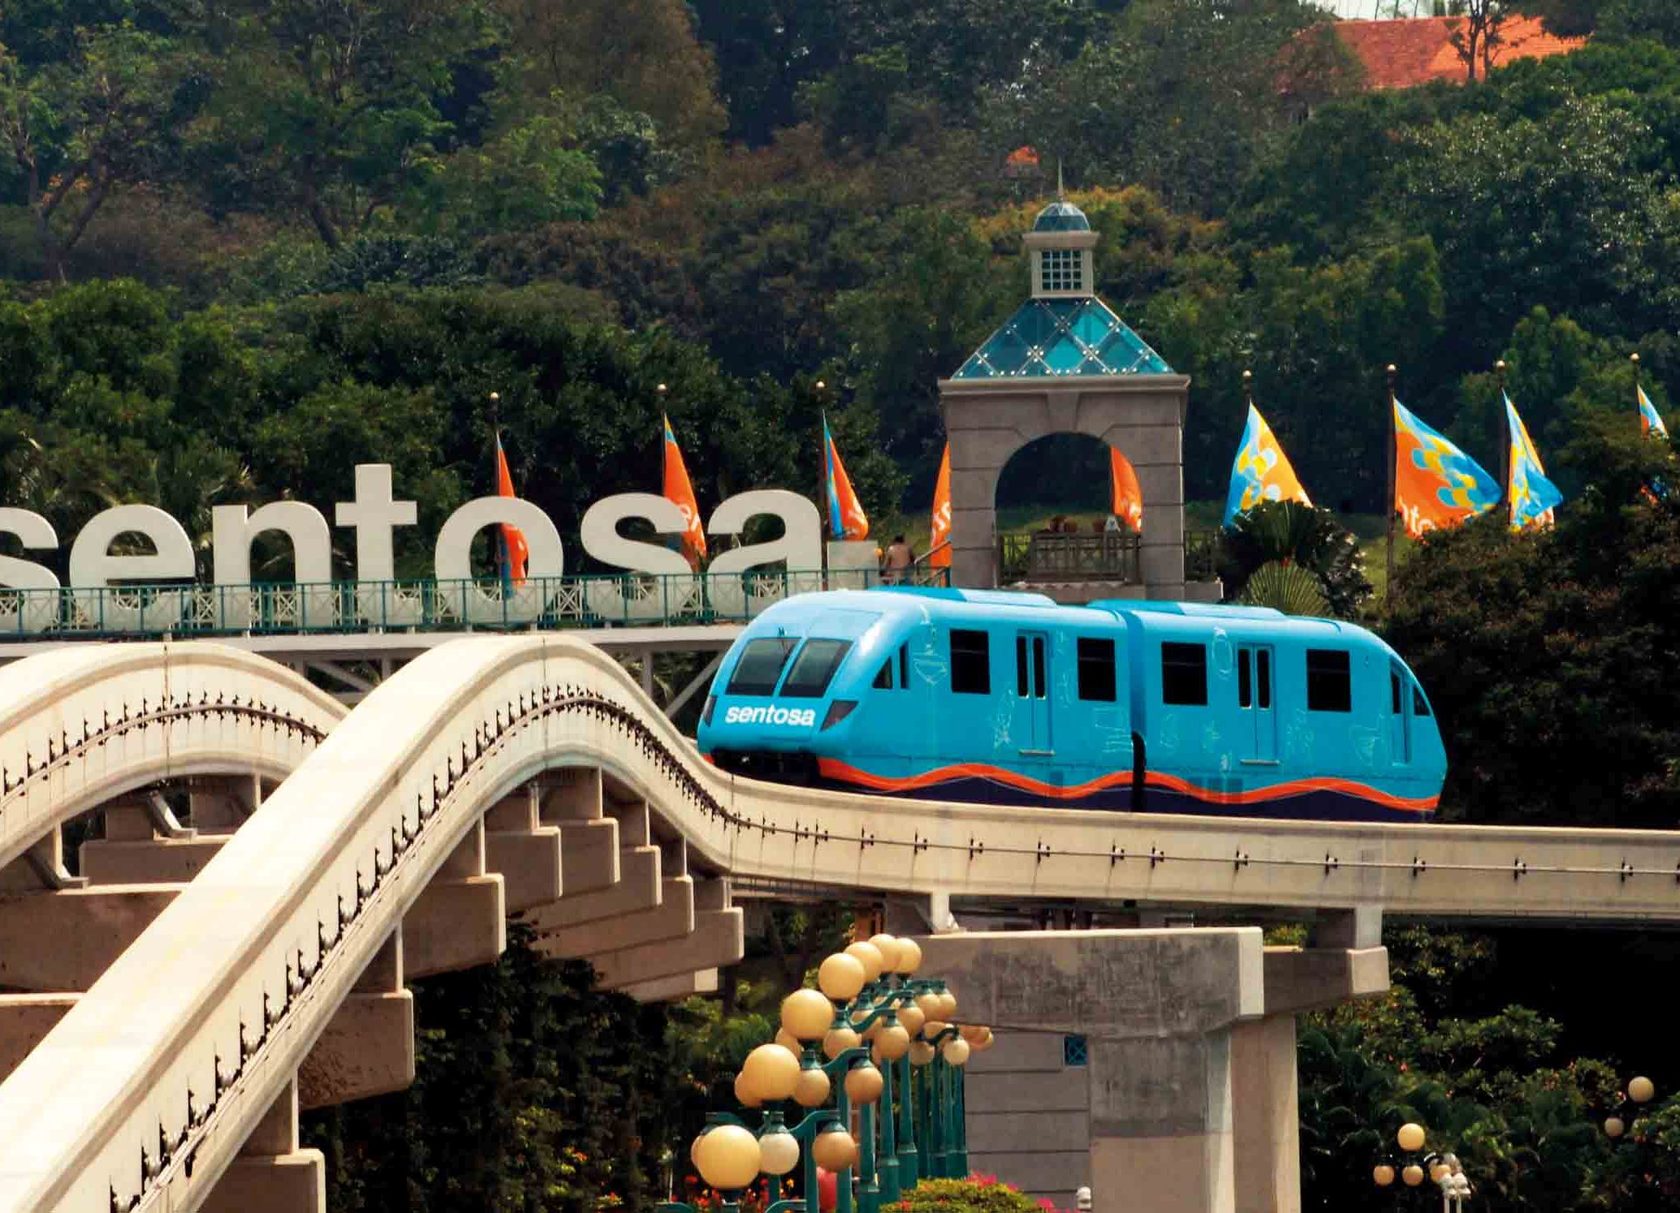 Attractions for tourists on Sentosa Island